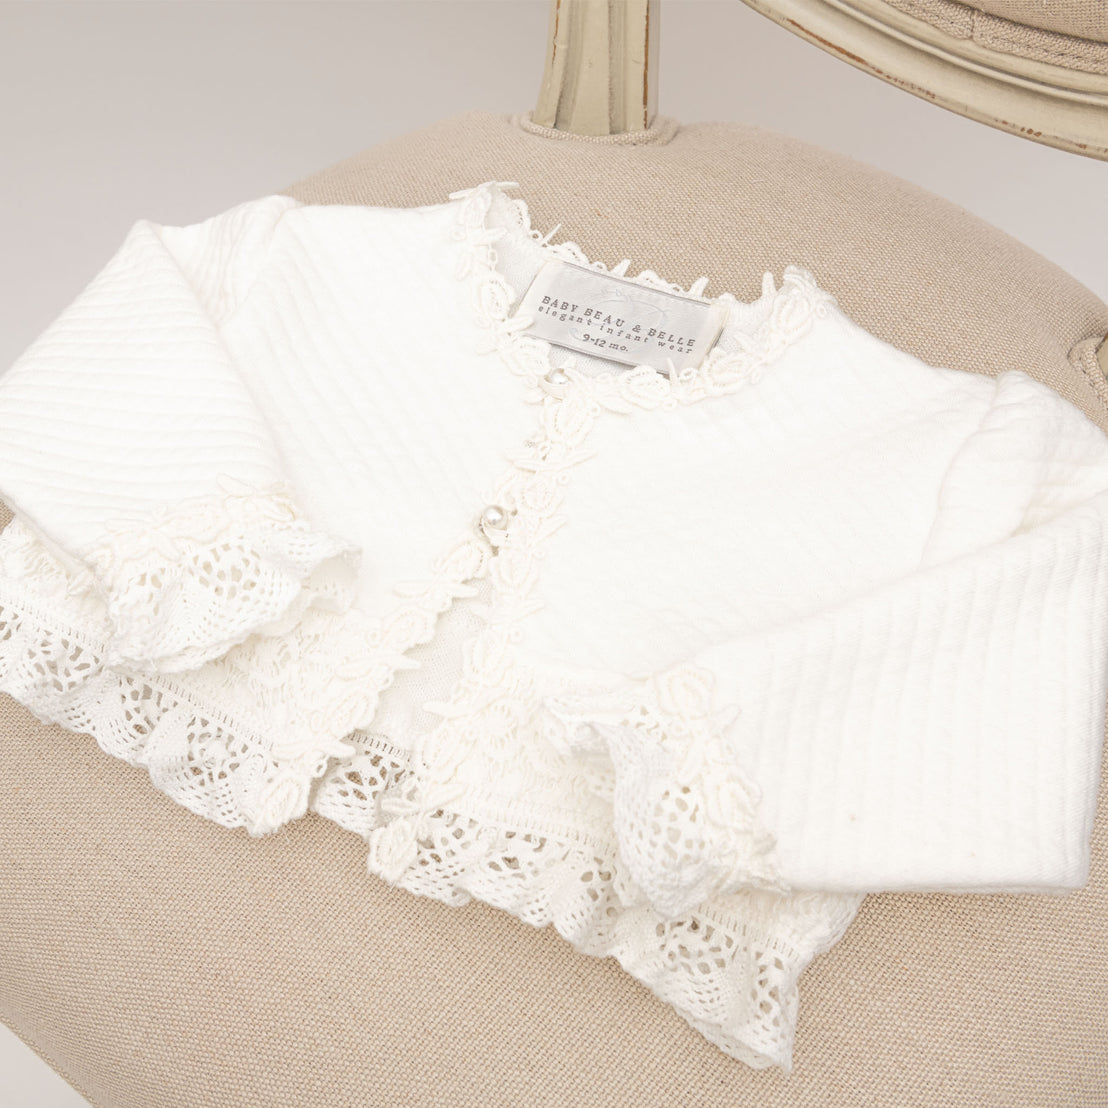 Flat lay of Lily Quilted Cotton Sweater made with ivory quilted cotton, ivory cotton lace with rose and vine floral embroidery, light ivory stretch lace, and pearl style buttons 